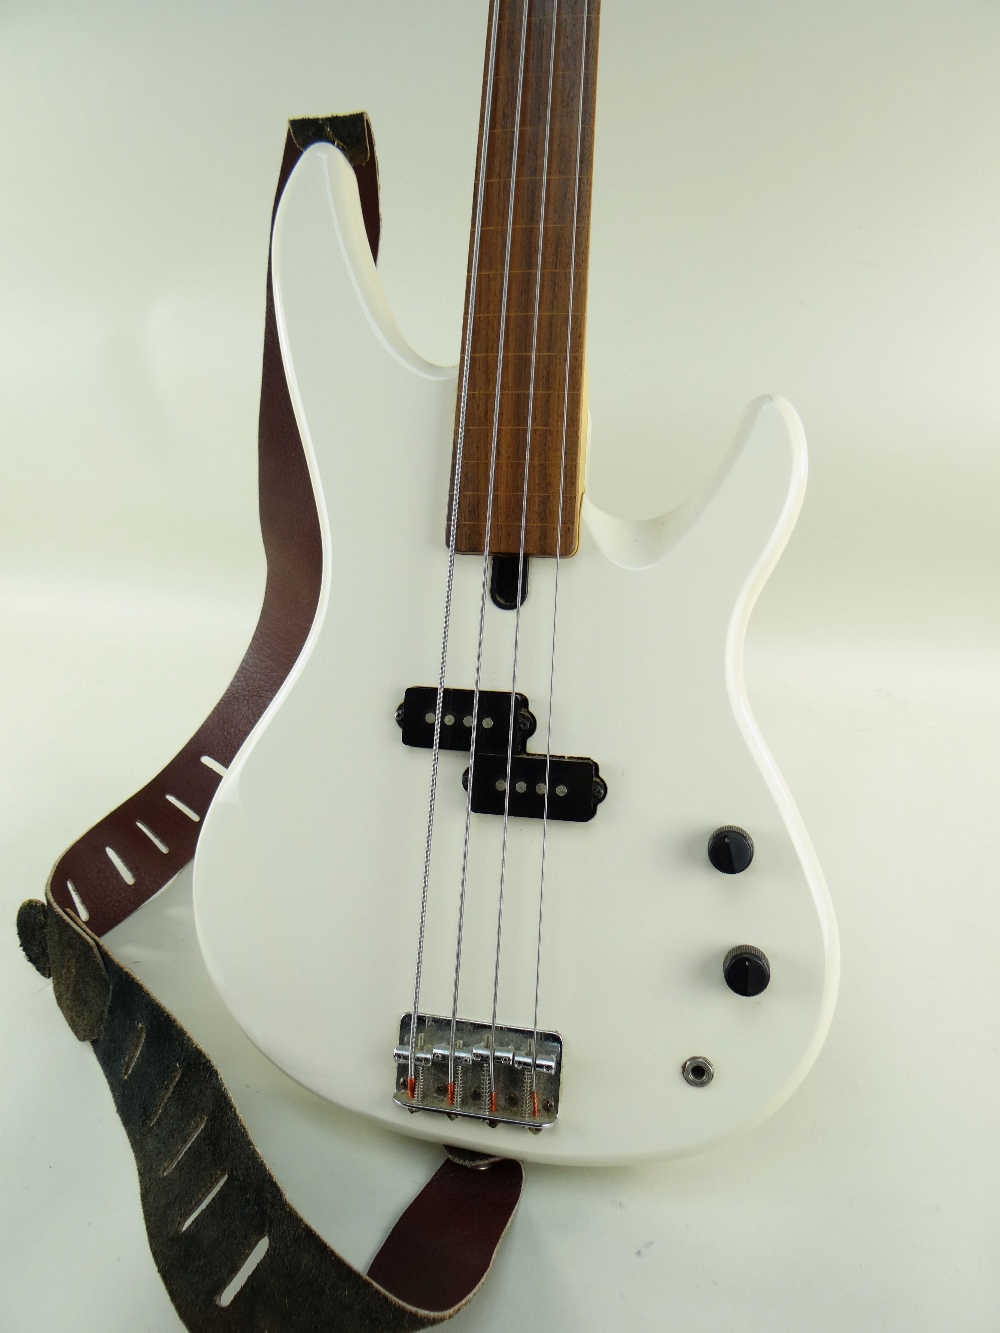 YAMAHA FRETLESS BASS GUITAR, model RBX250F, off-white finish with inlaid line fretboard, 113cms long